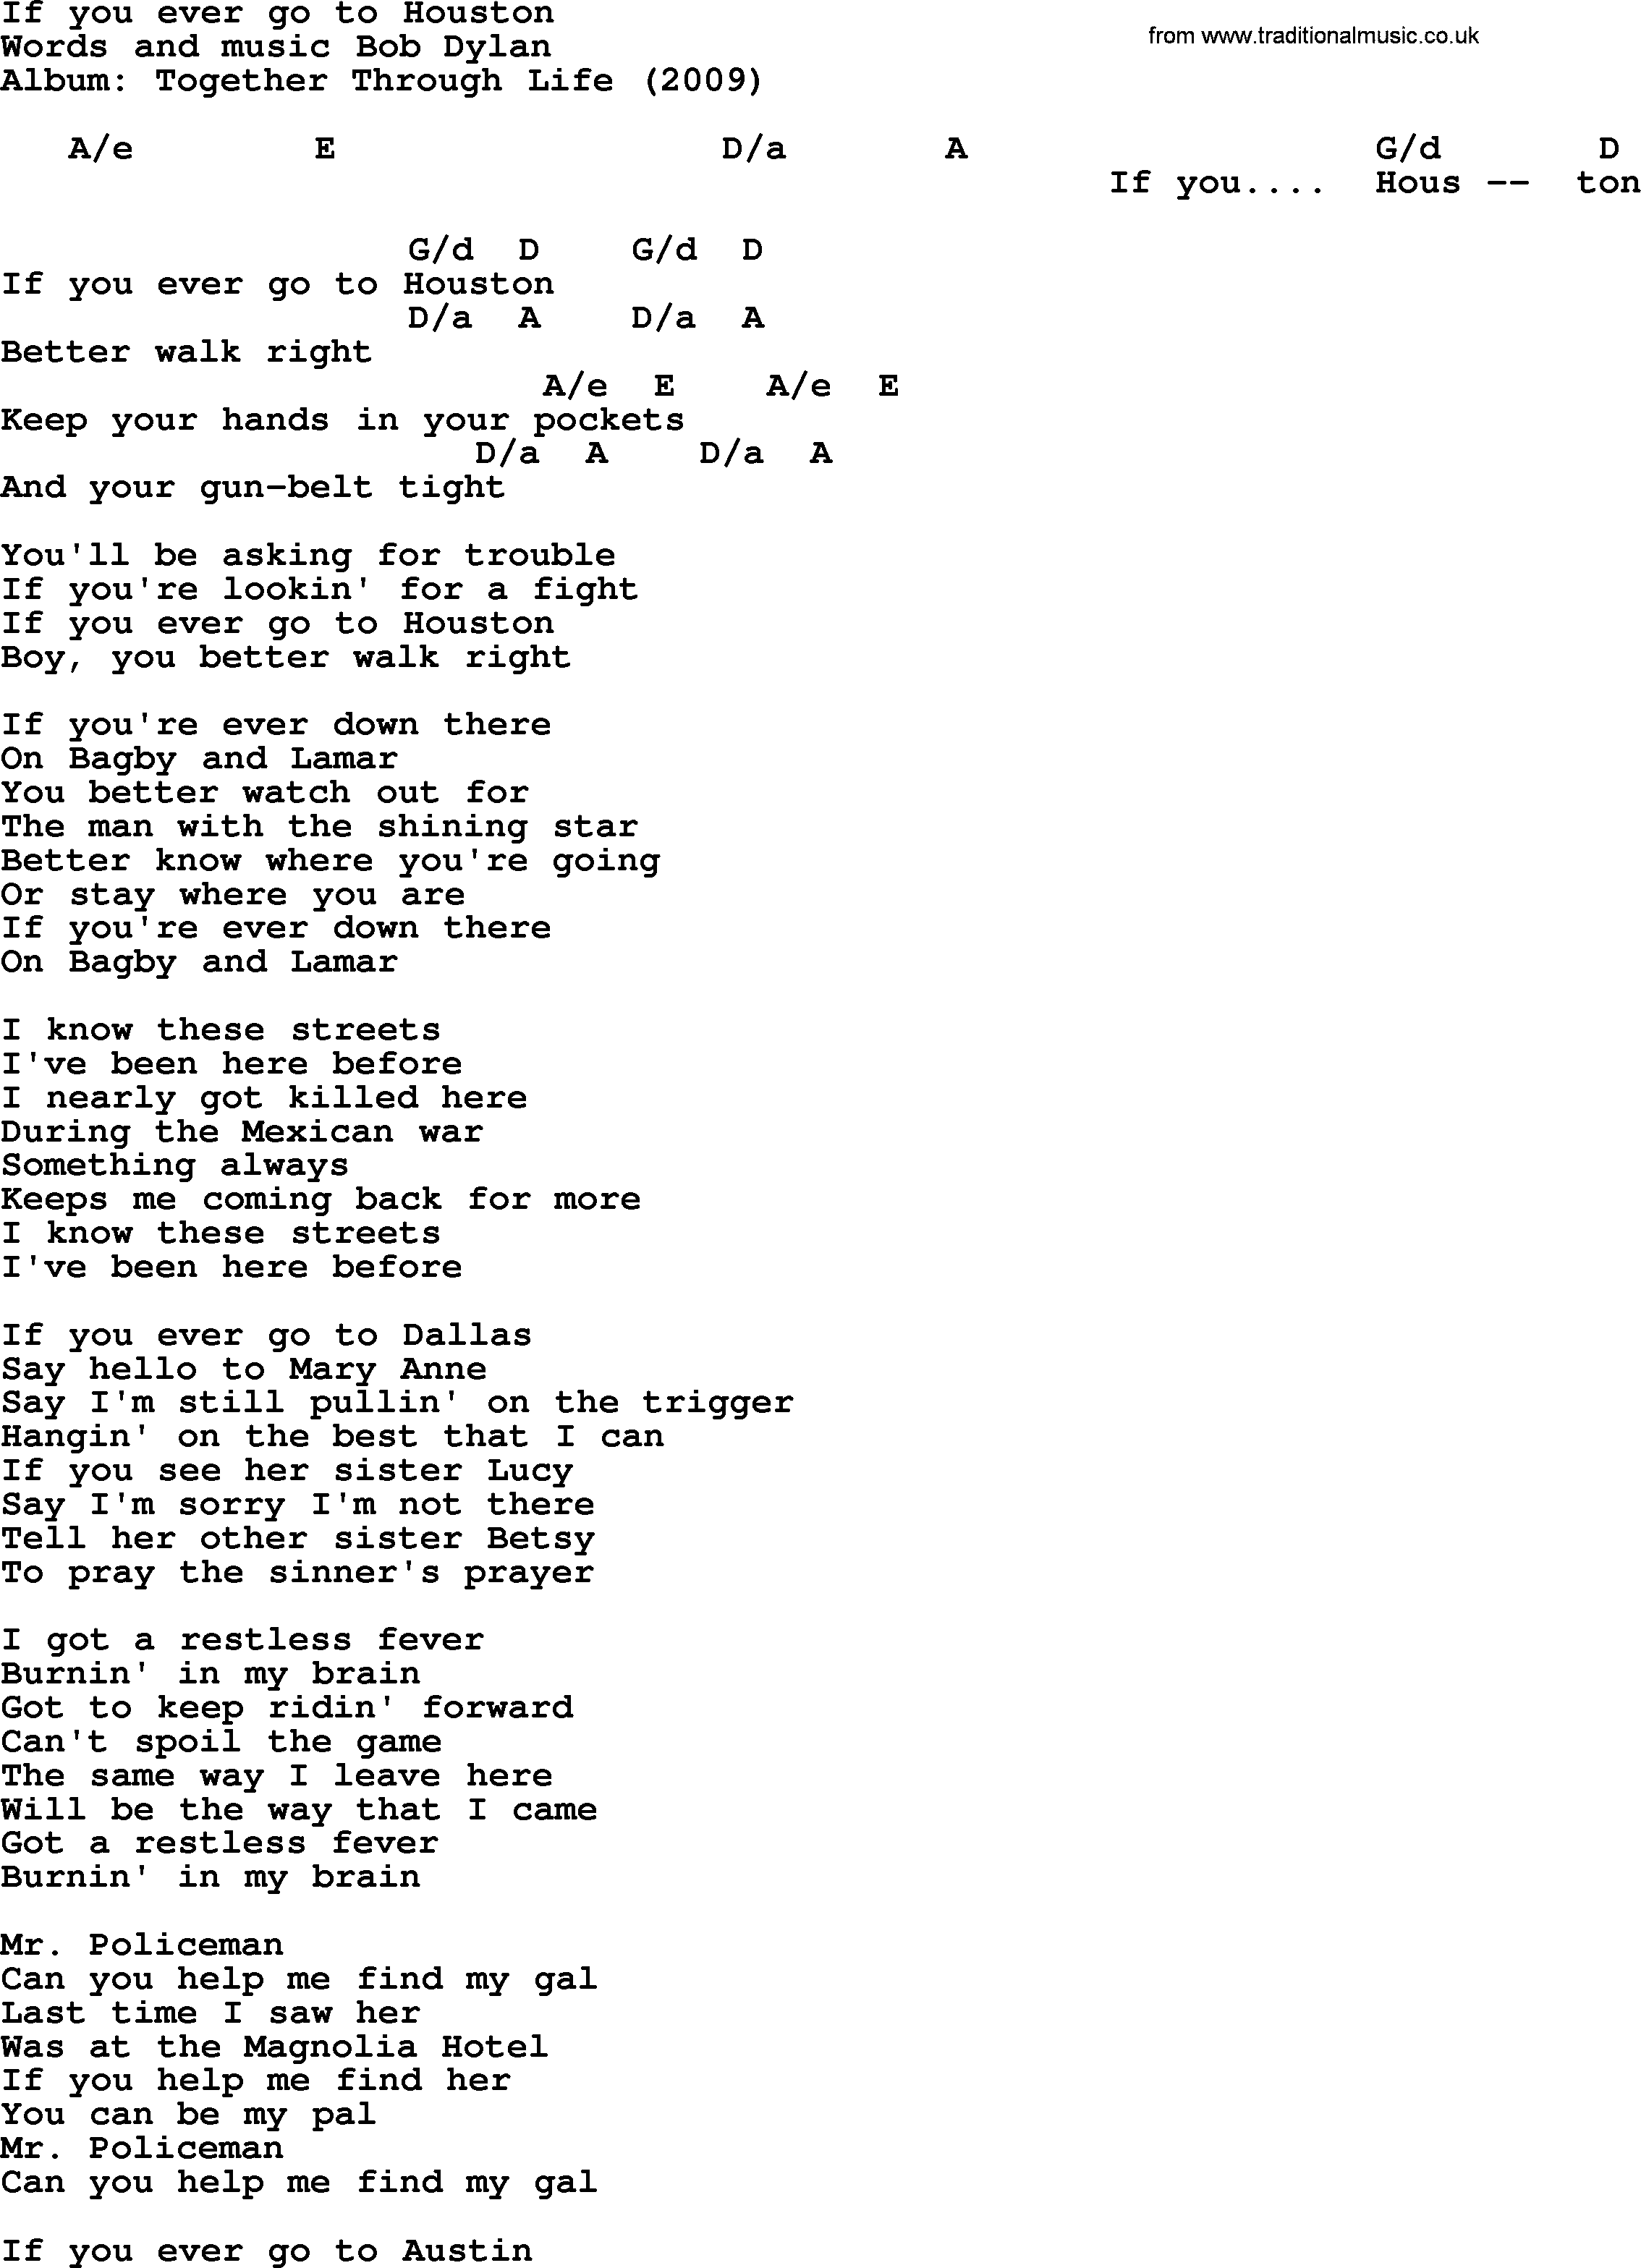 Bob Dylan song, lyrics with chords - If you ever go to Houston